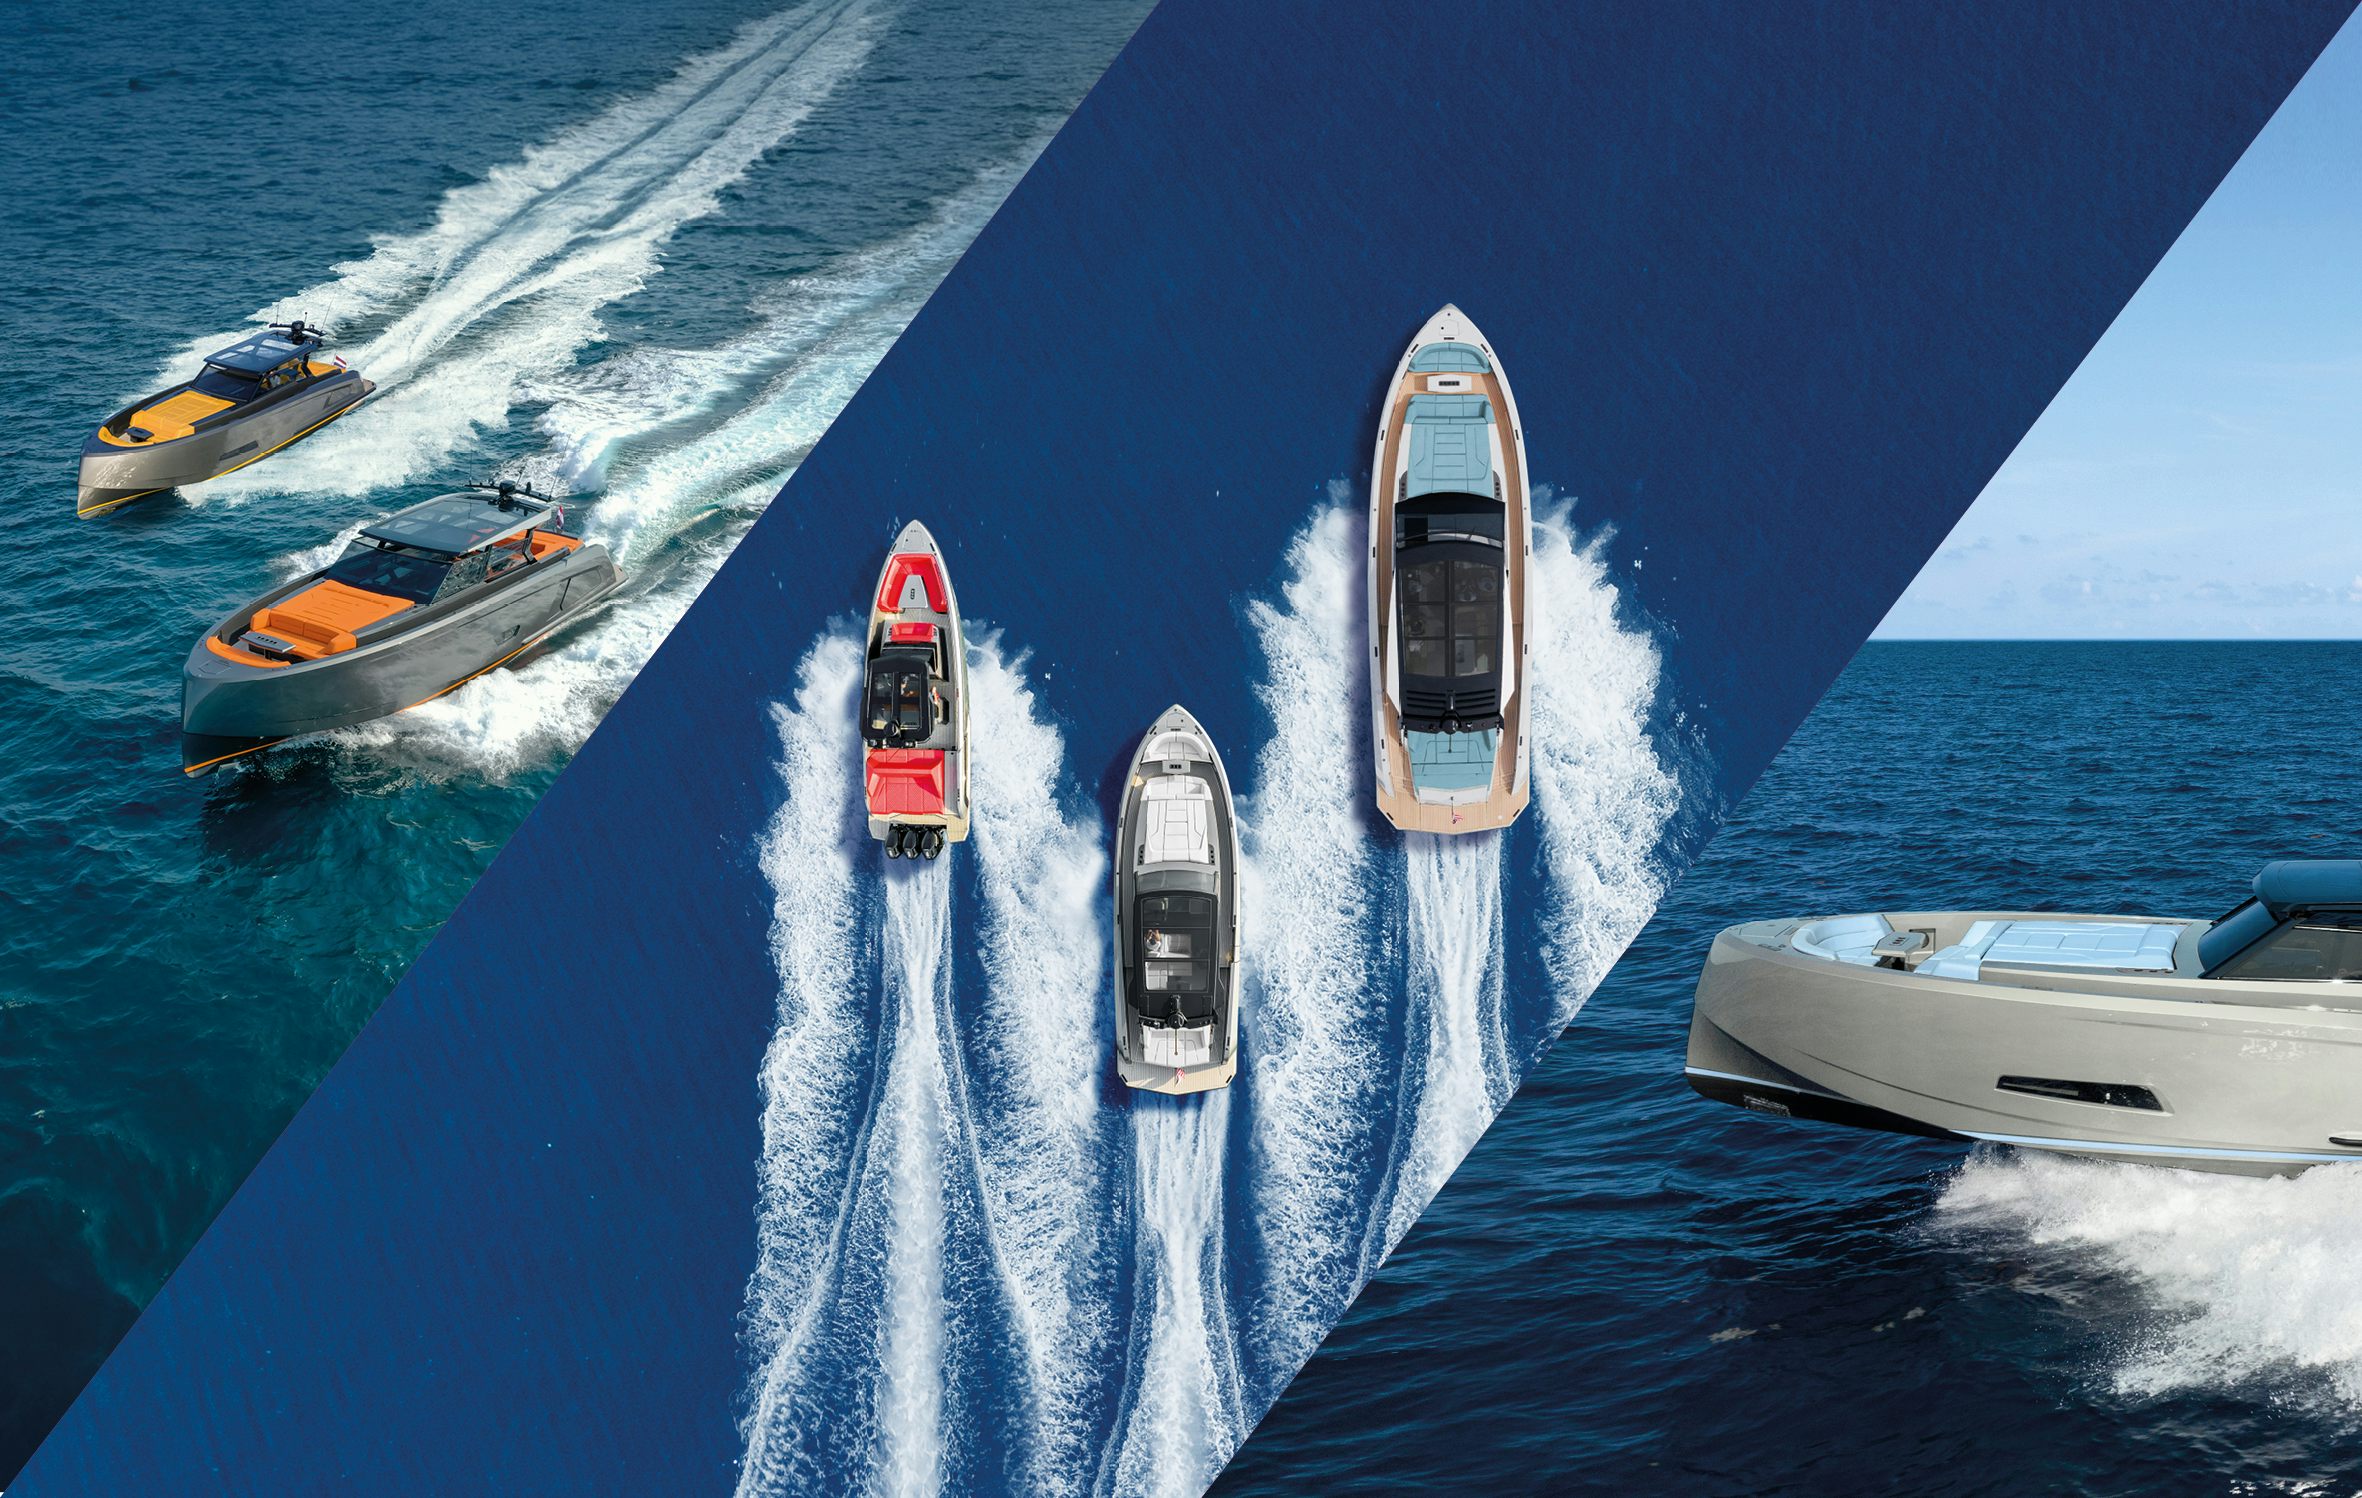 Vanquish Yachts looks back on a successful boat show season